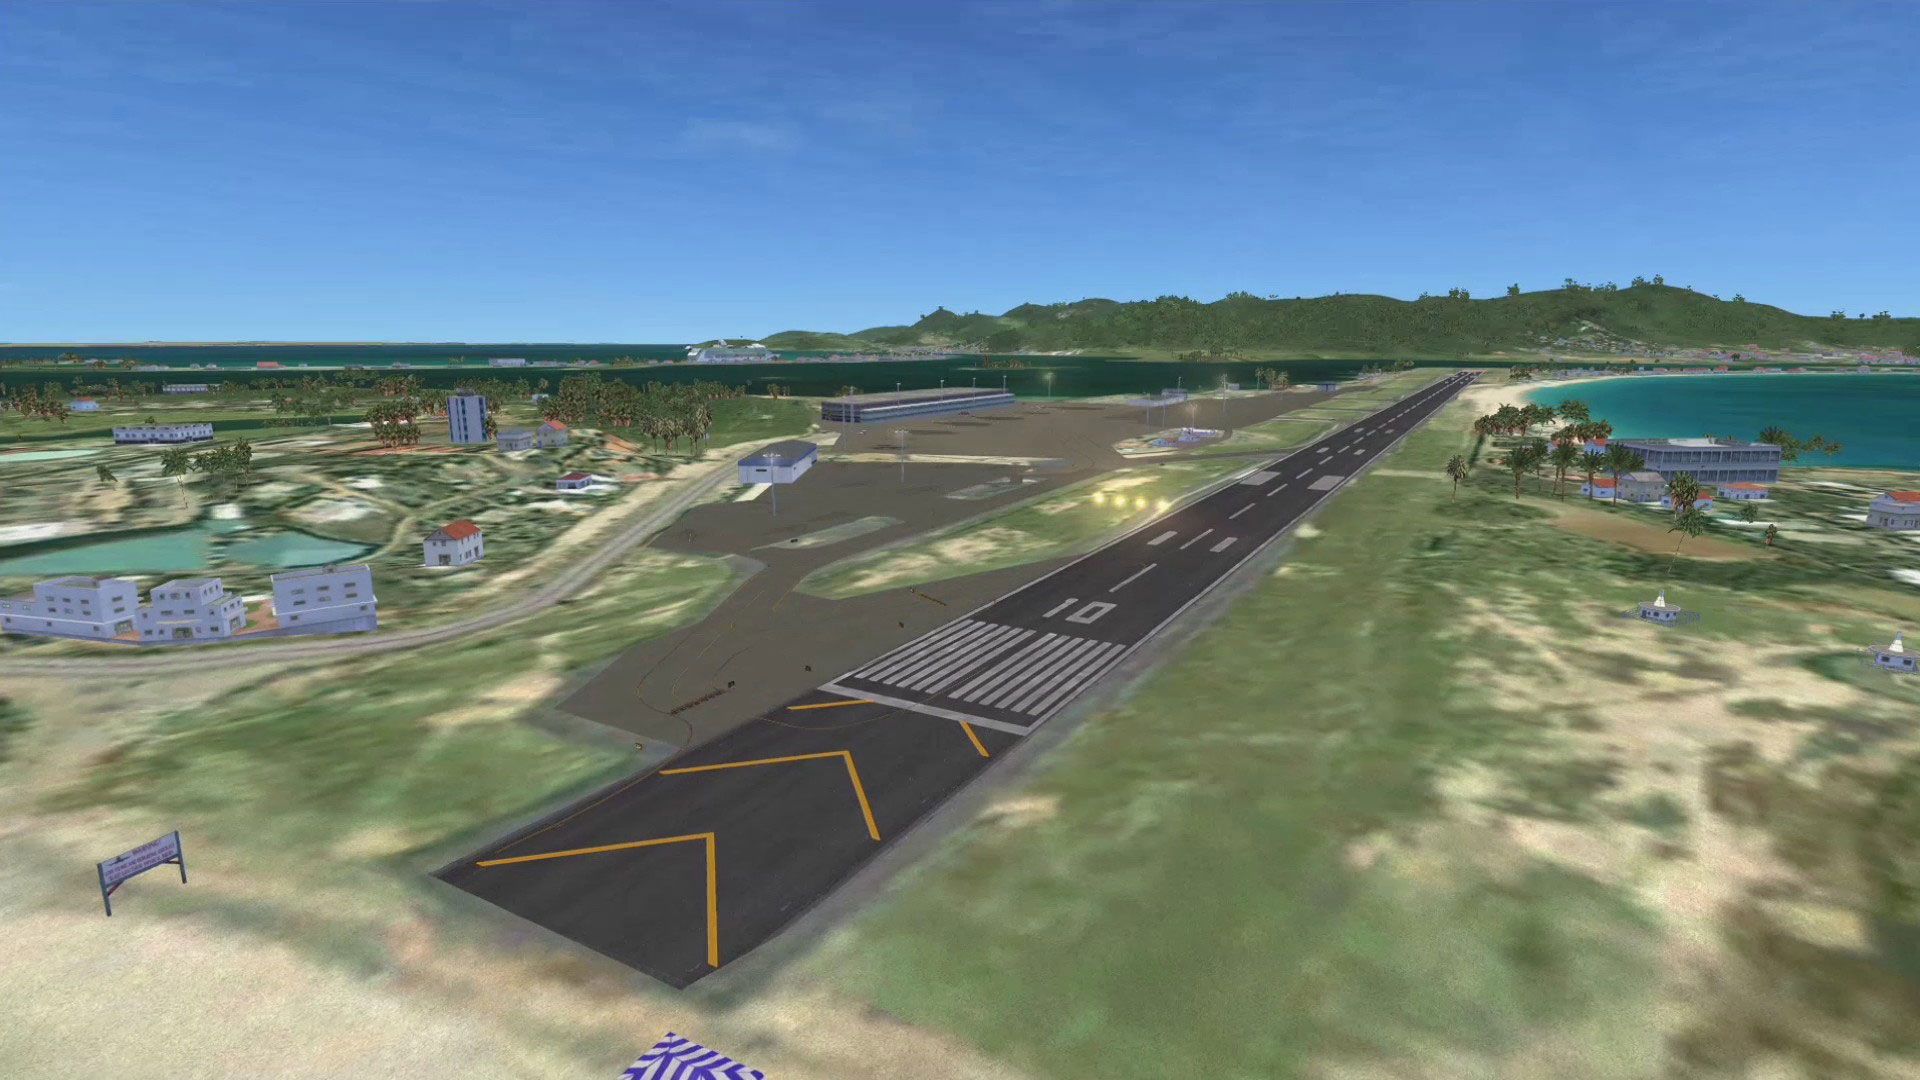 Fsx airport scenery density image complexity